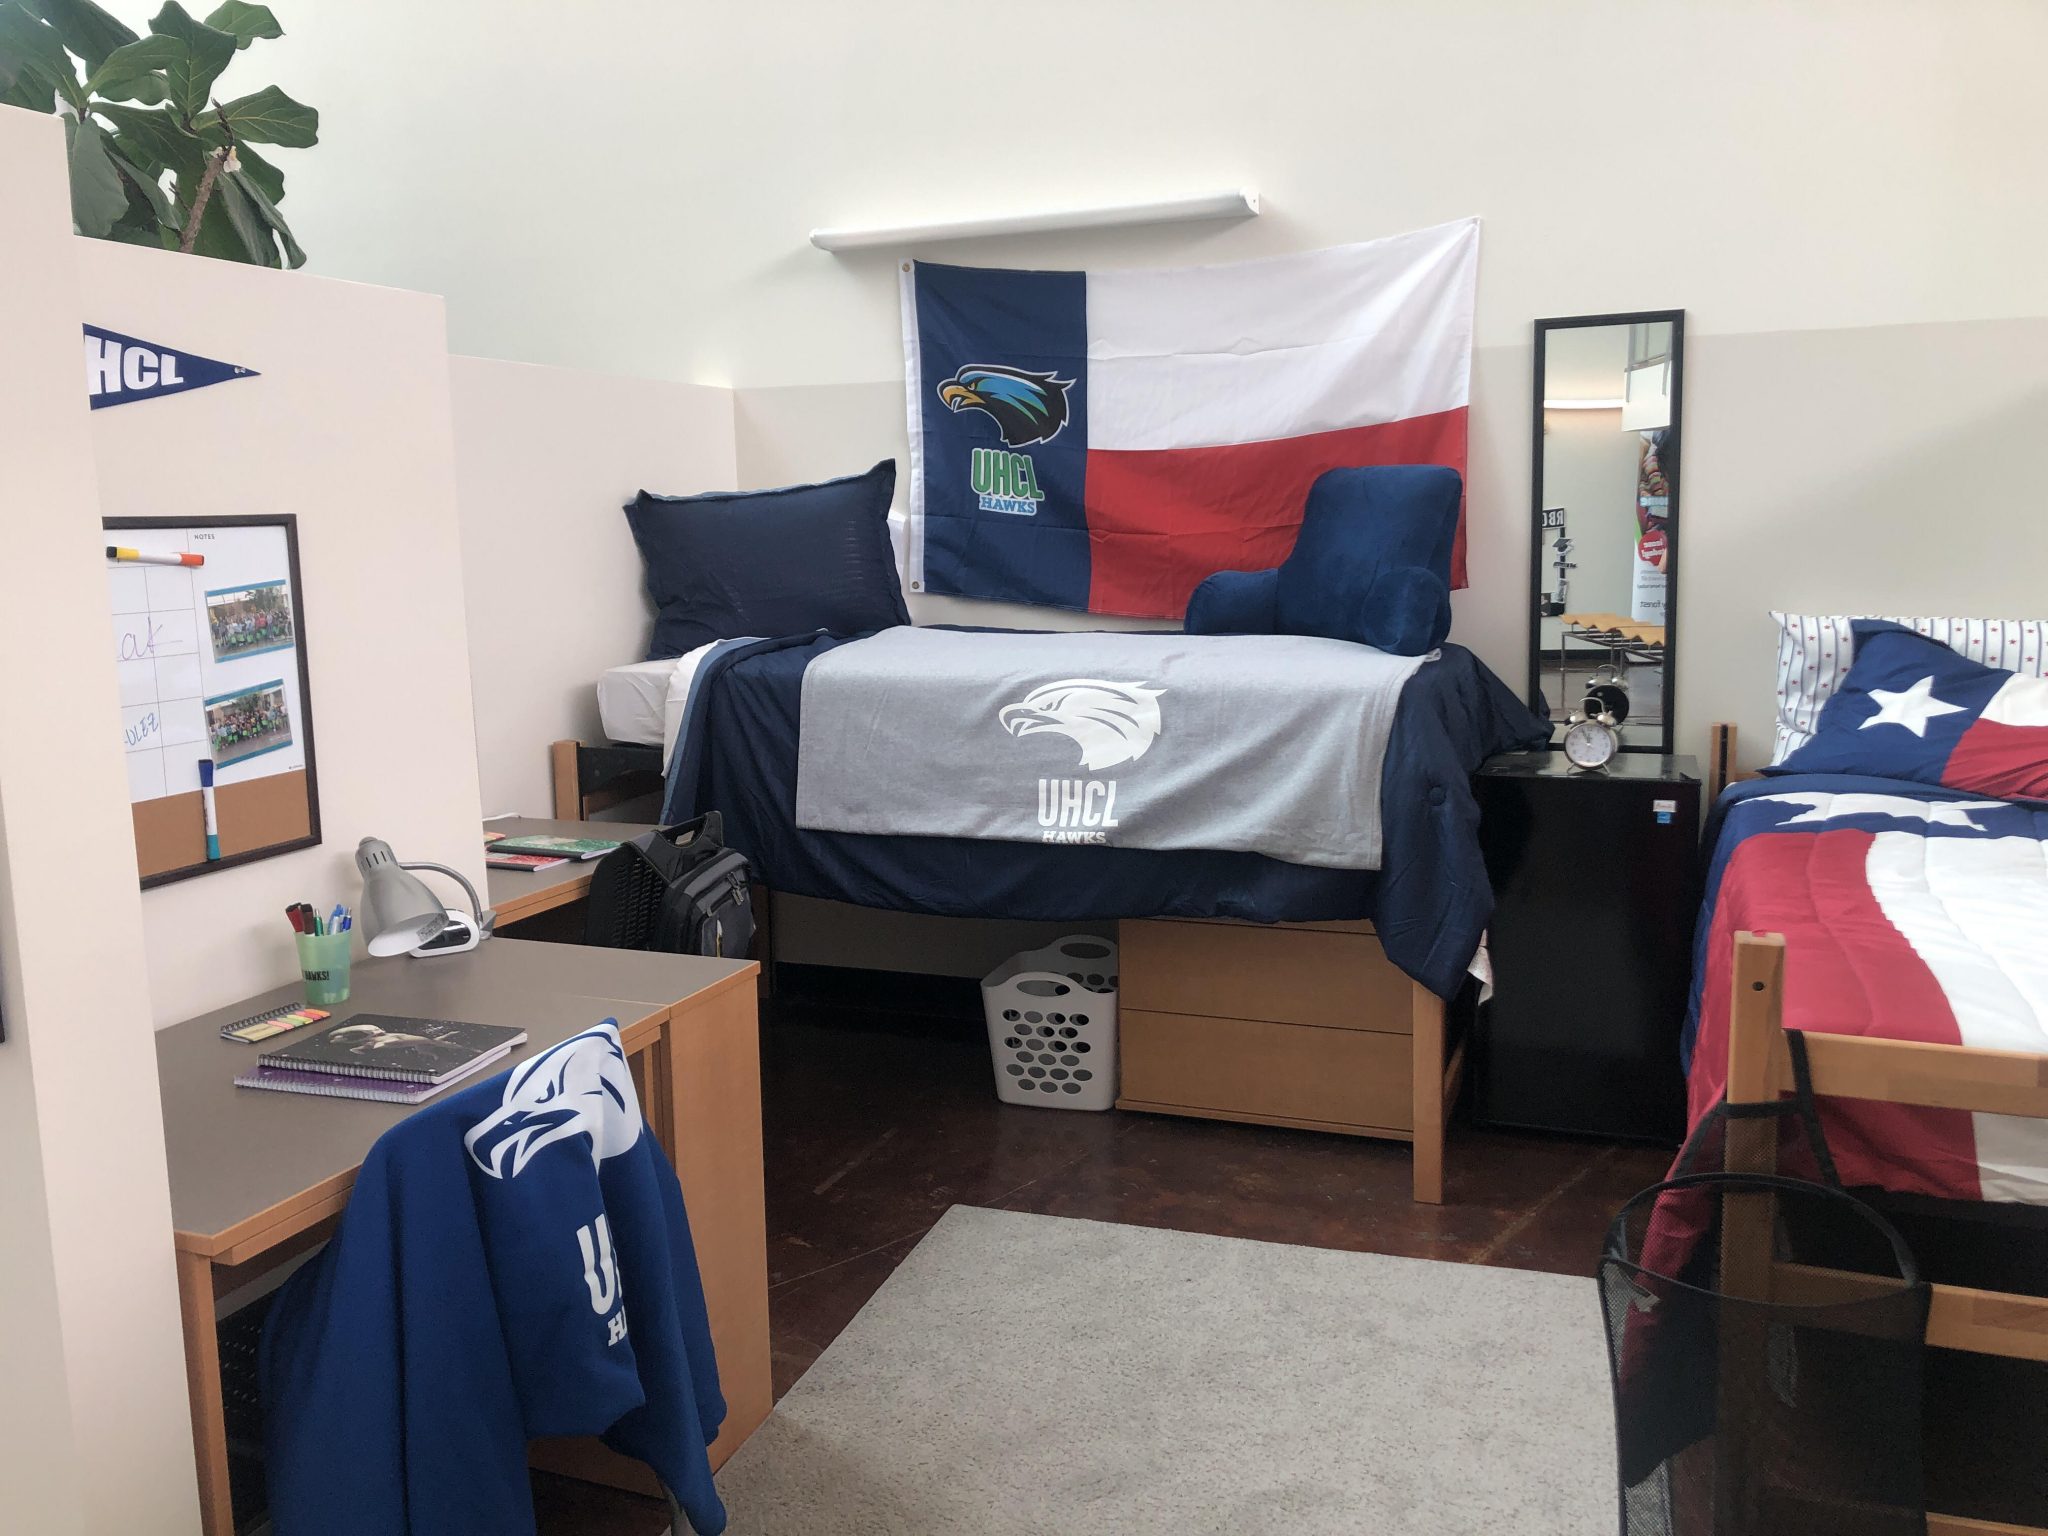 PHOTO: New Resident Hall layout. Pictured is the room's features for the upcoming residents hall at UHCL. Photo by The Signal reporter Erica Honore